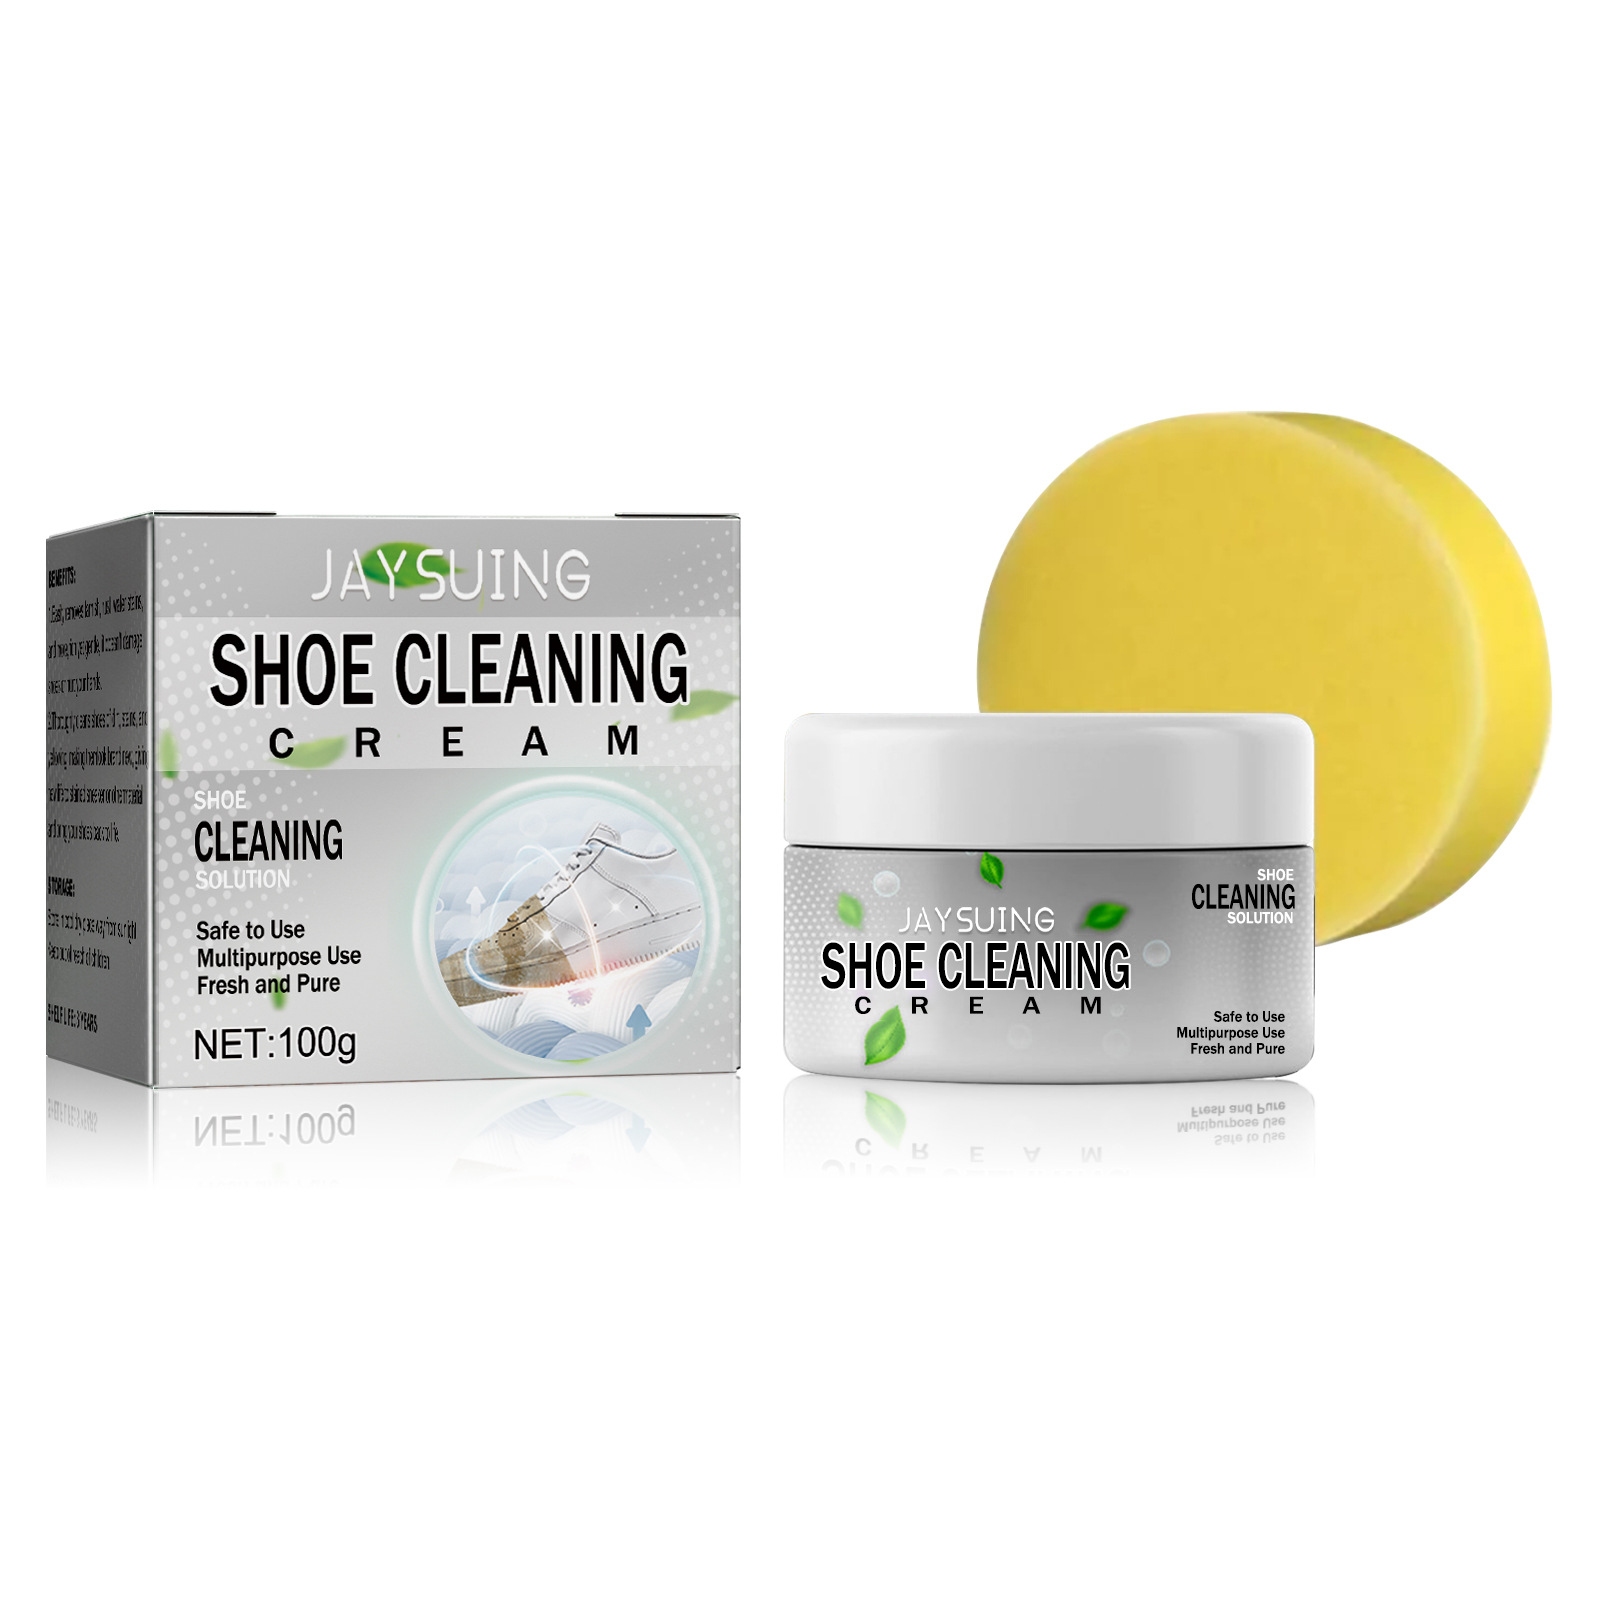 Jaysuing Shoe Cream Cleaning White Shoes Edge Stain Oxidation Yellow Leather Suede Brightening White Shoe Polish Cream